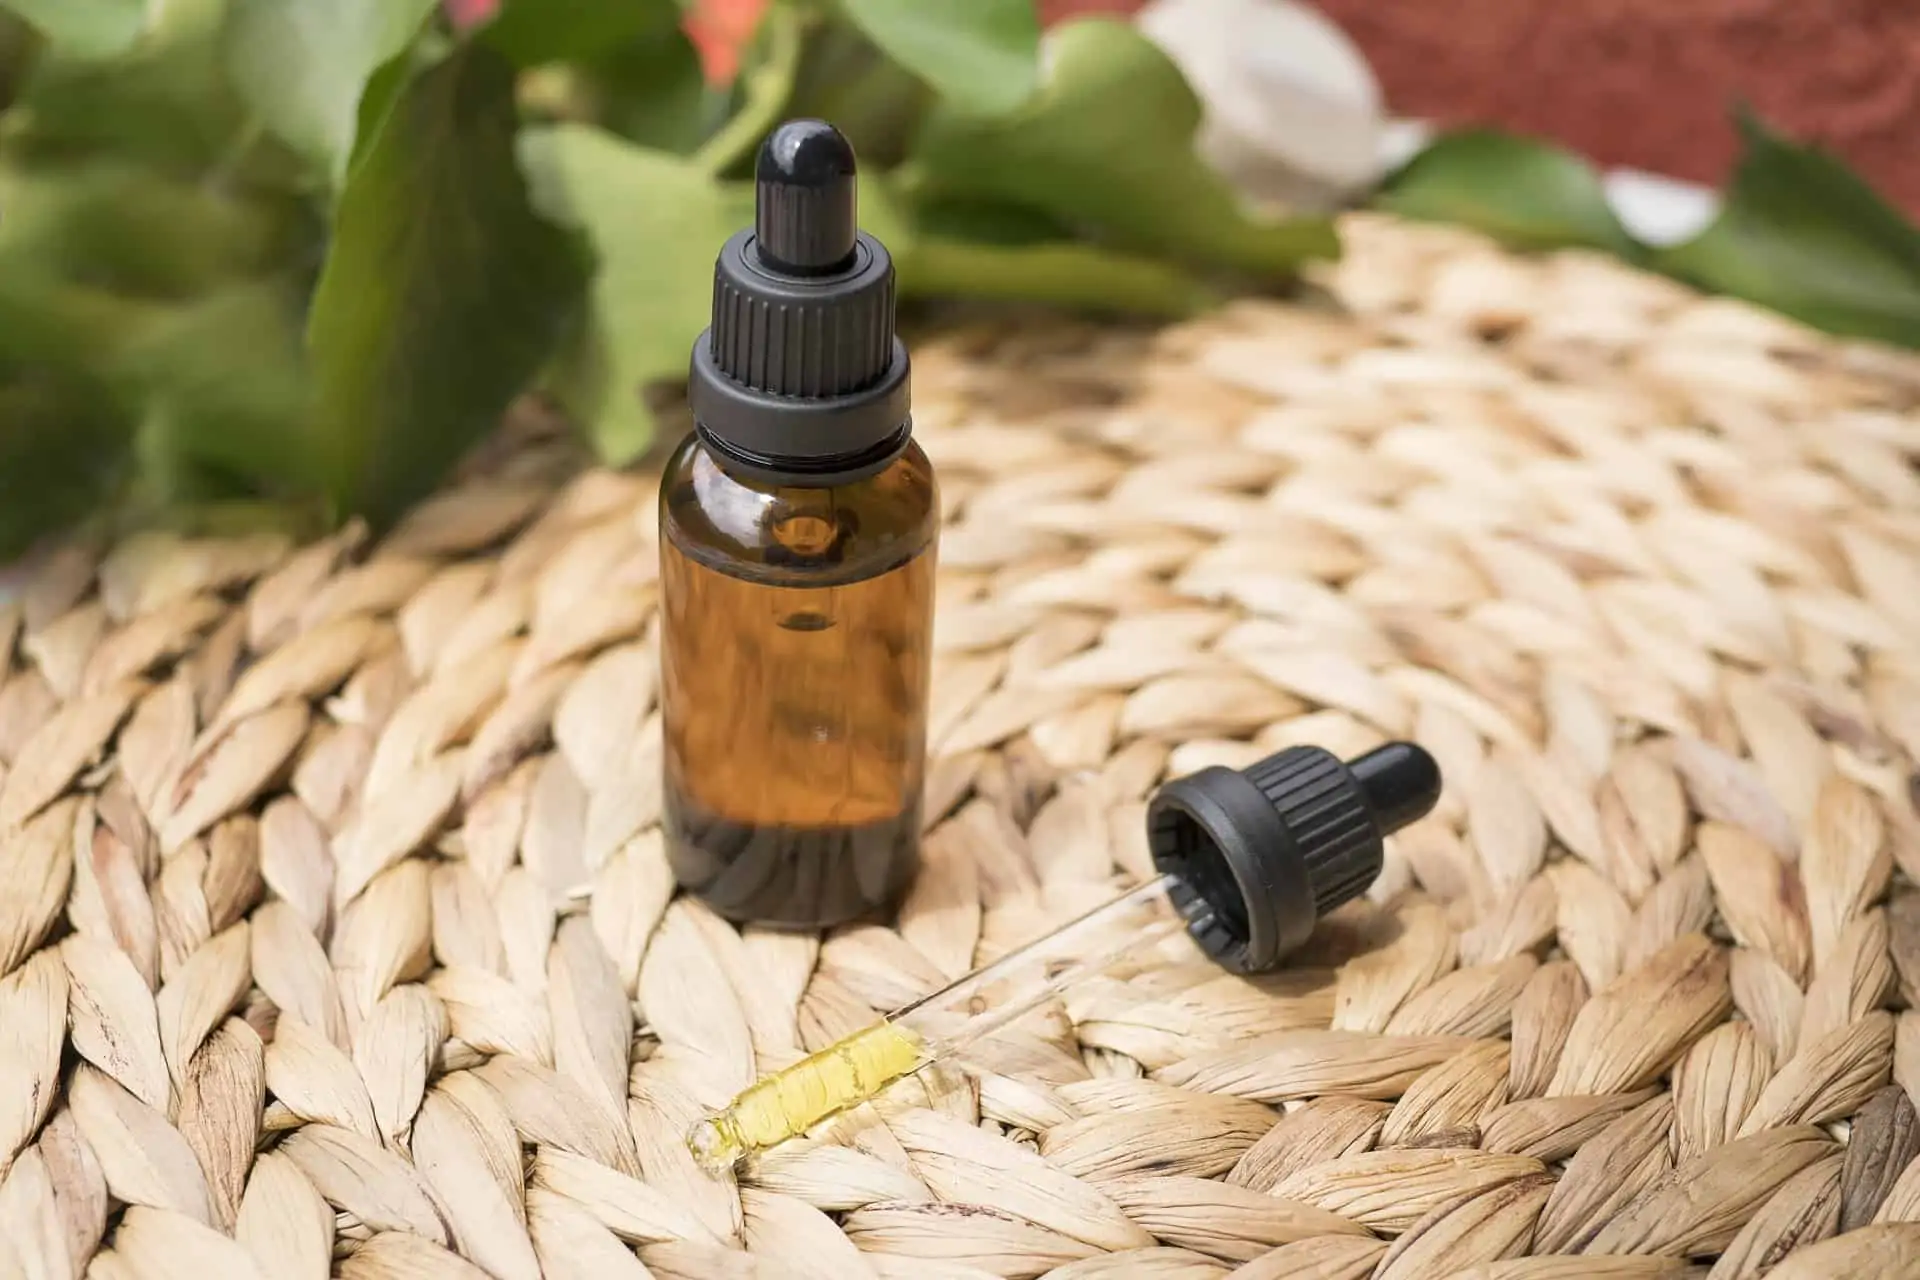 How to Make a Glycerin-Based Cannabis Tincture at Home